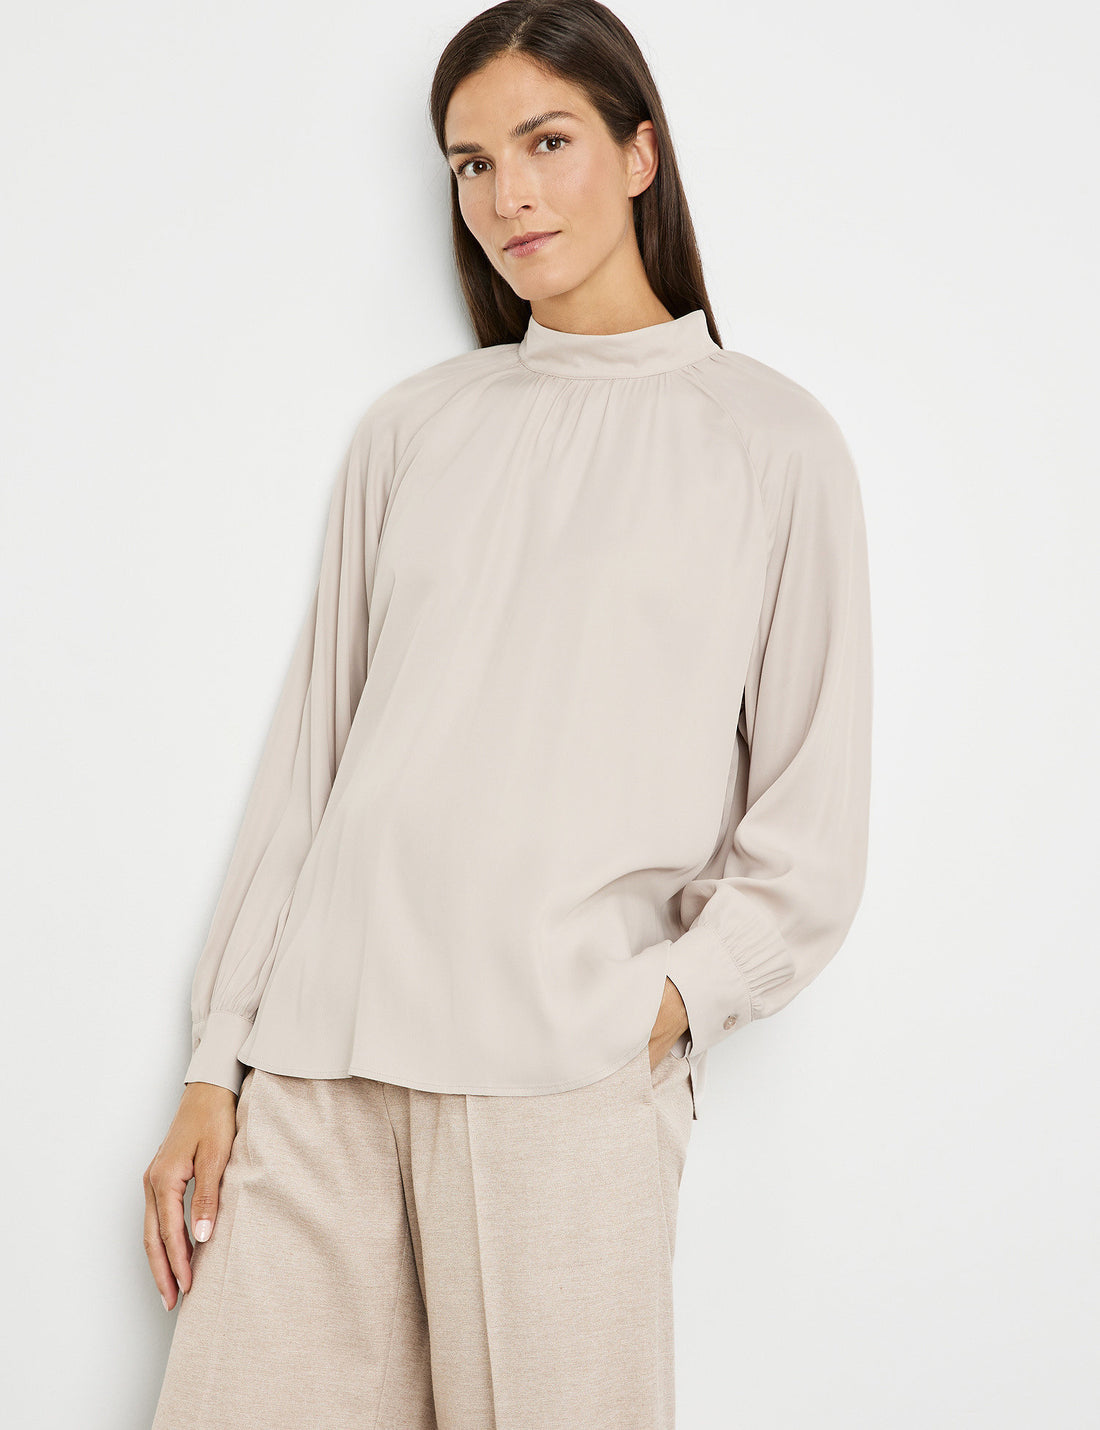 Blouse With A Stand-Up Collar_260016-31410_90544_01